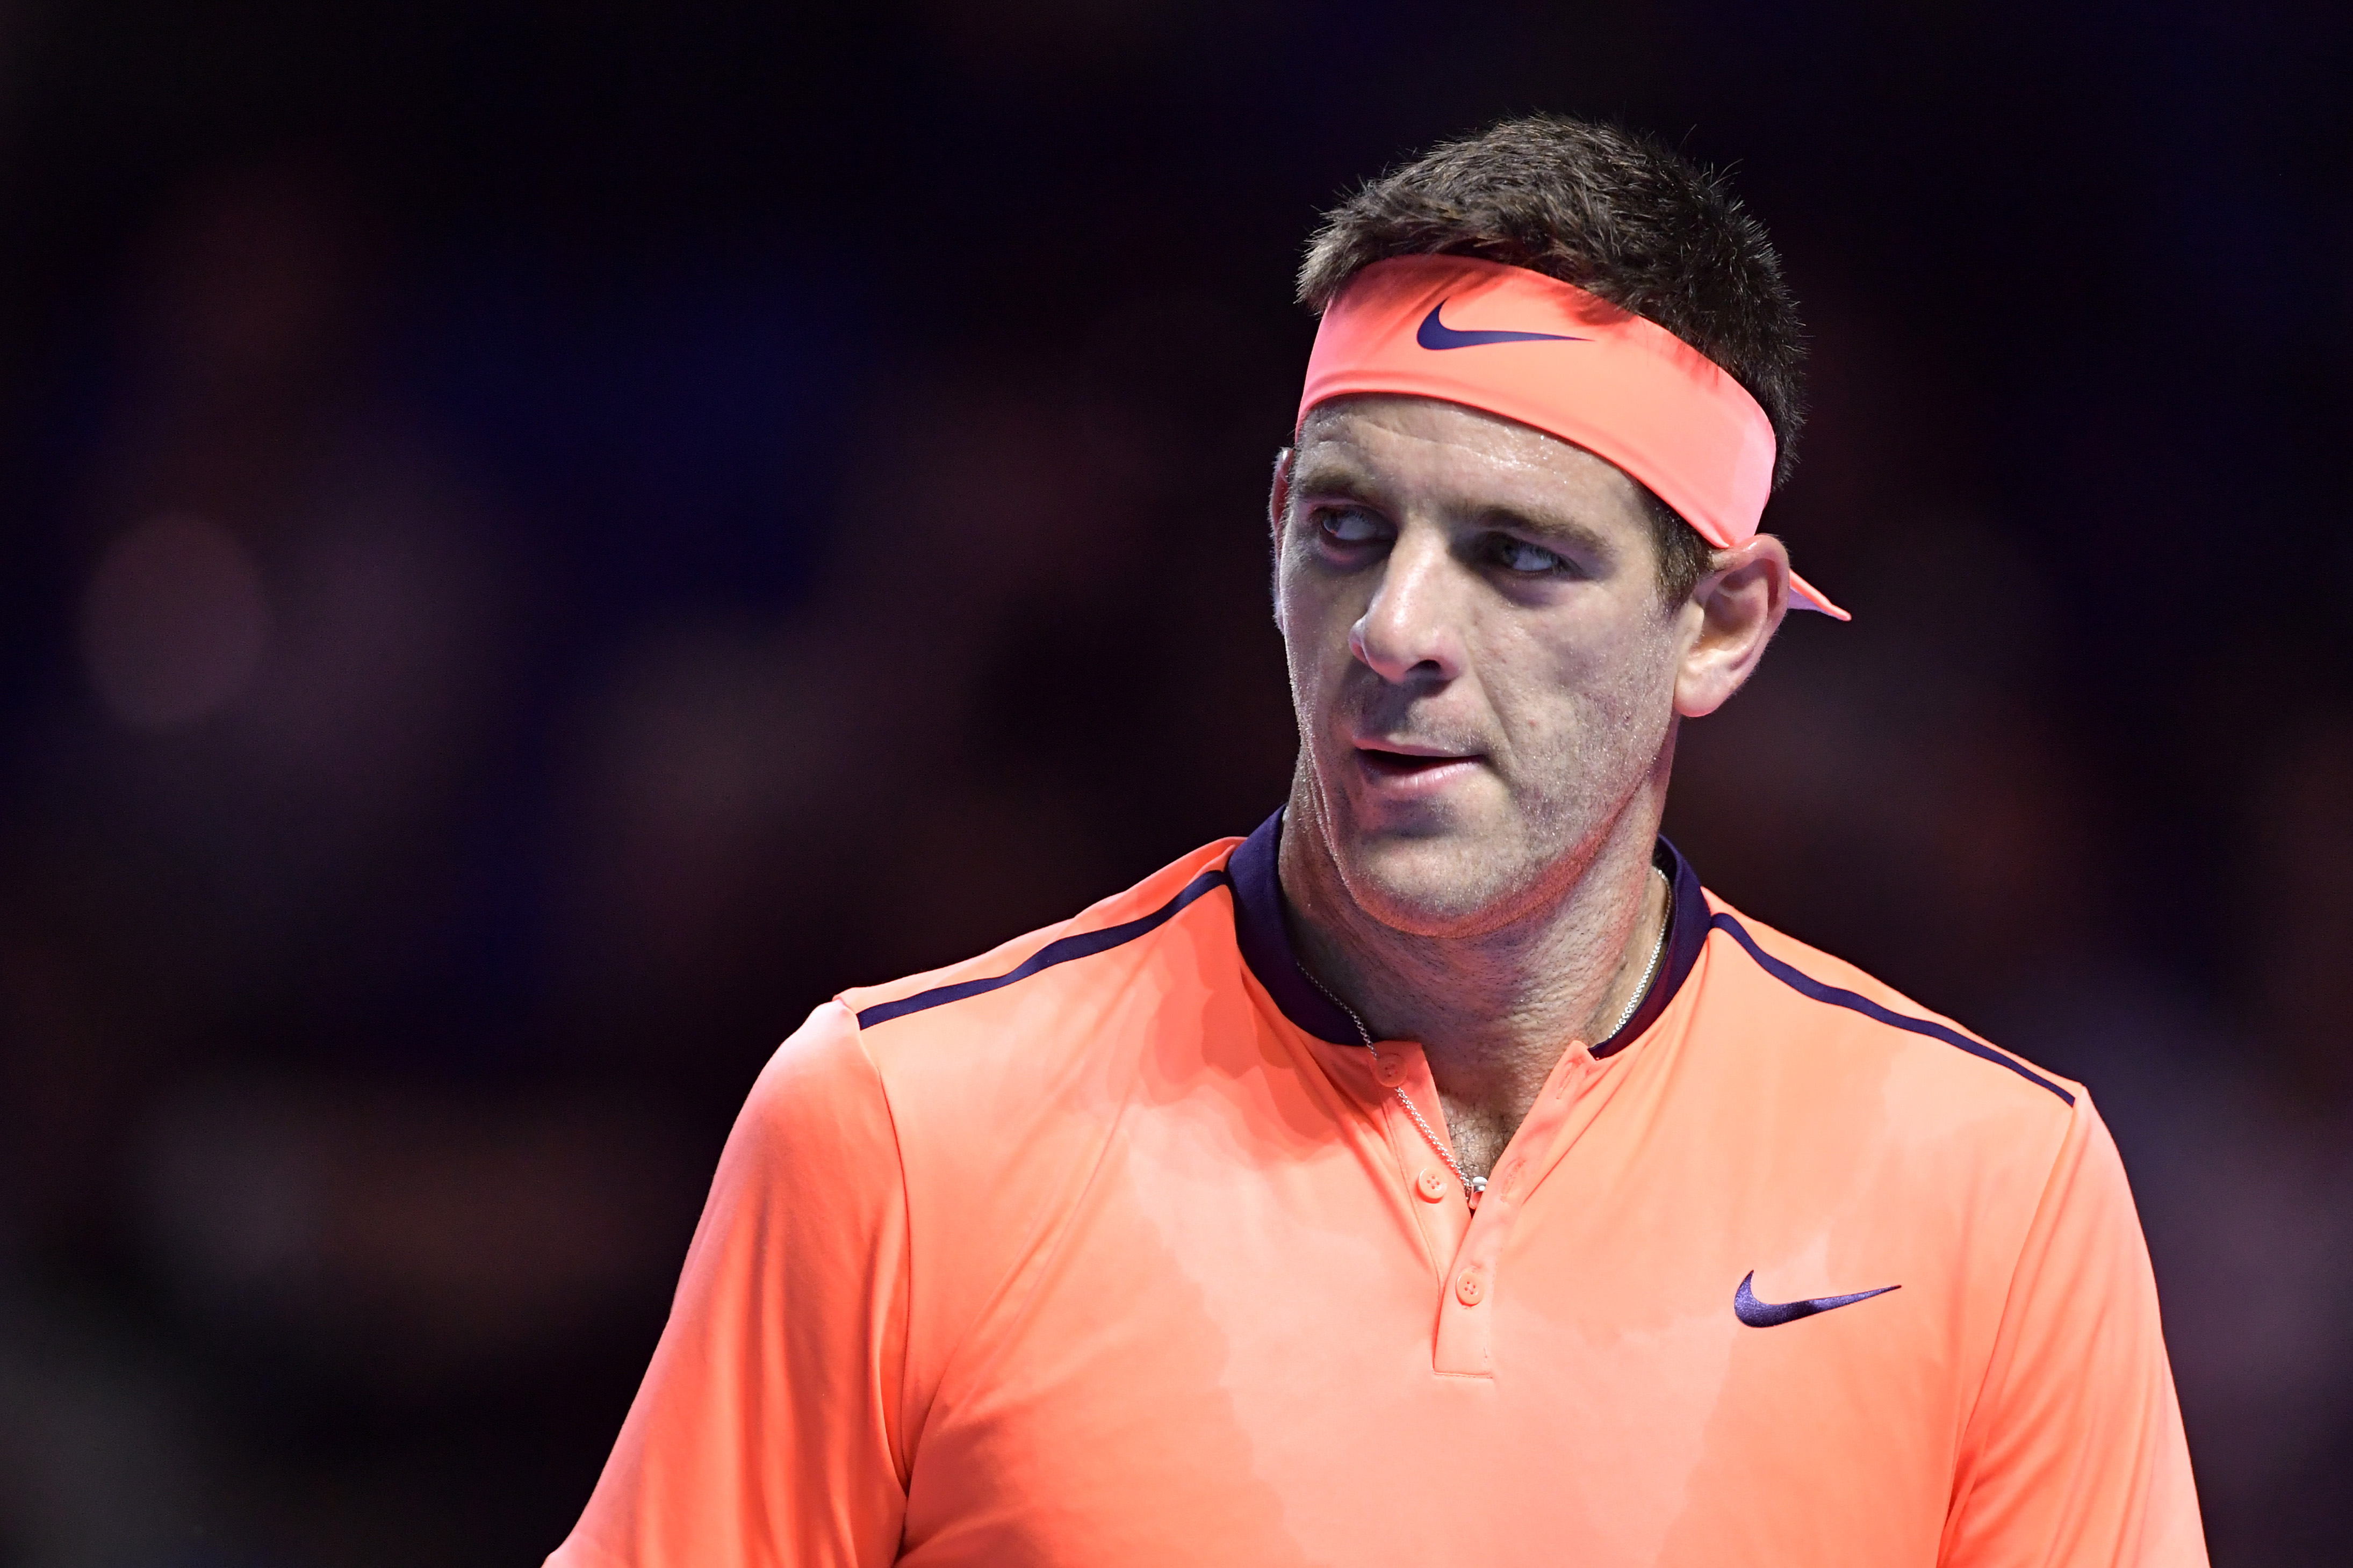 Del Potro out for the season with fractured knee